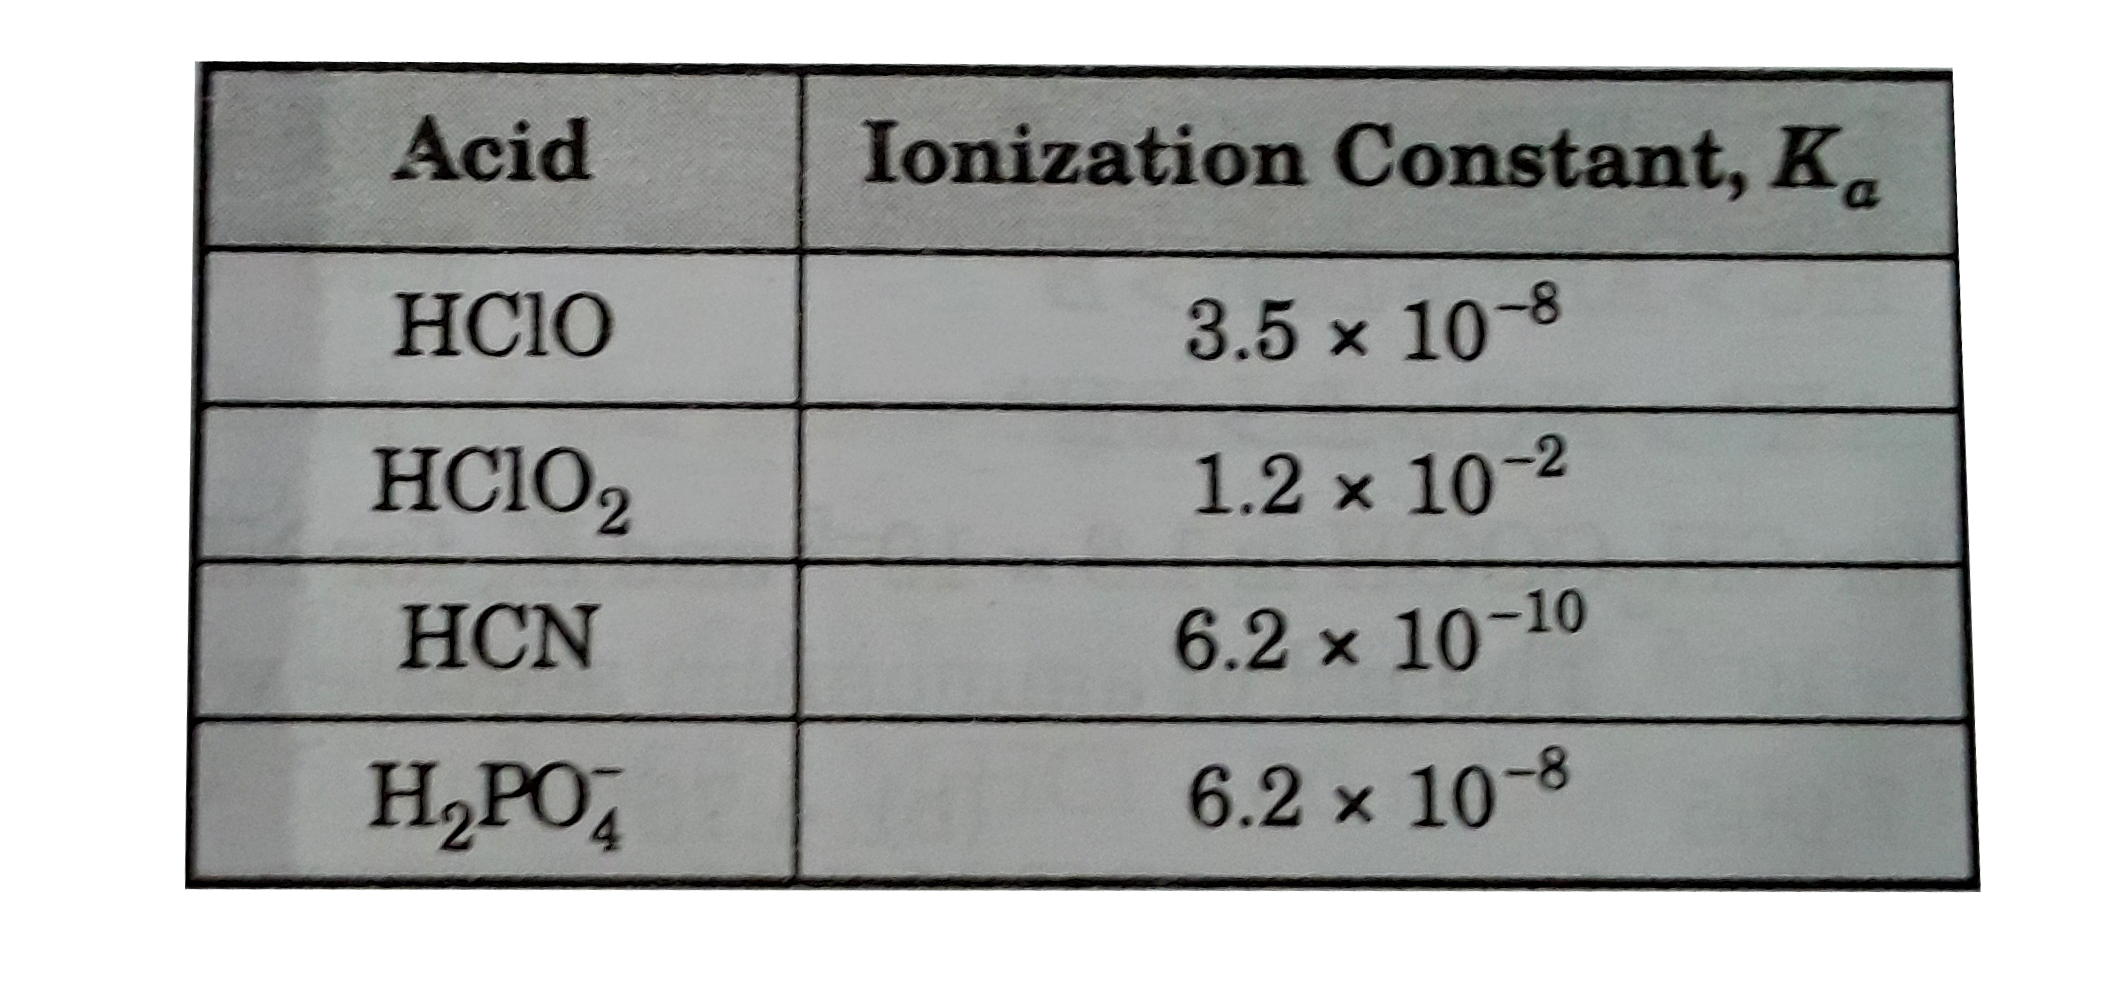 Given the acid ionization constants when the conjugate bases are arranged in order of increasing base strength , which order is correct ?